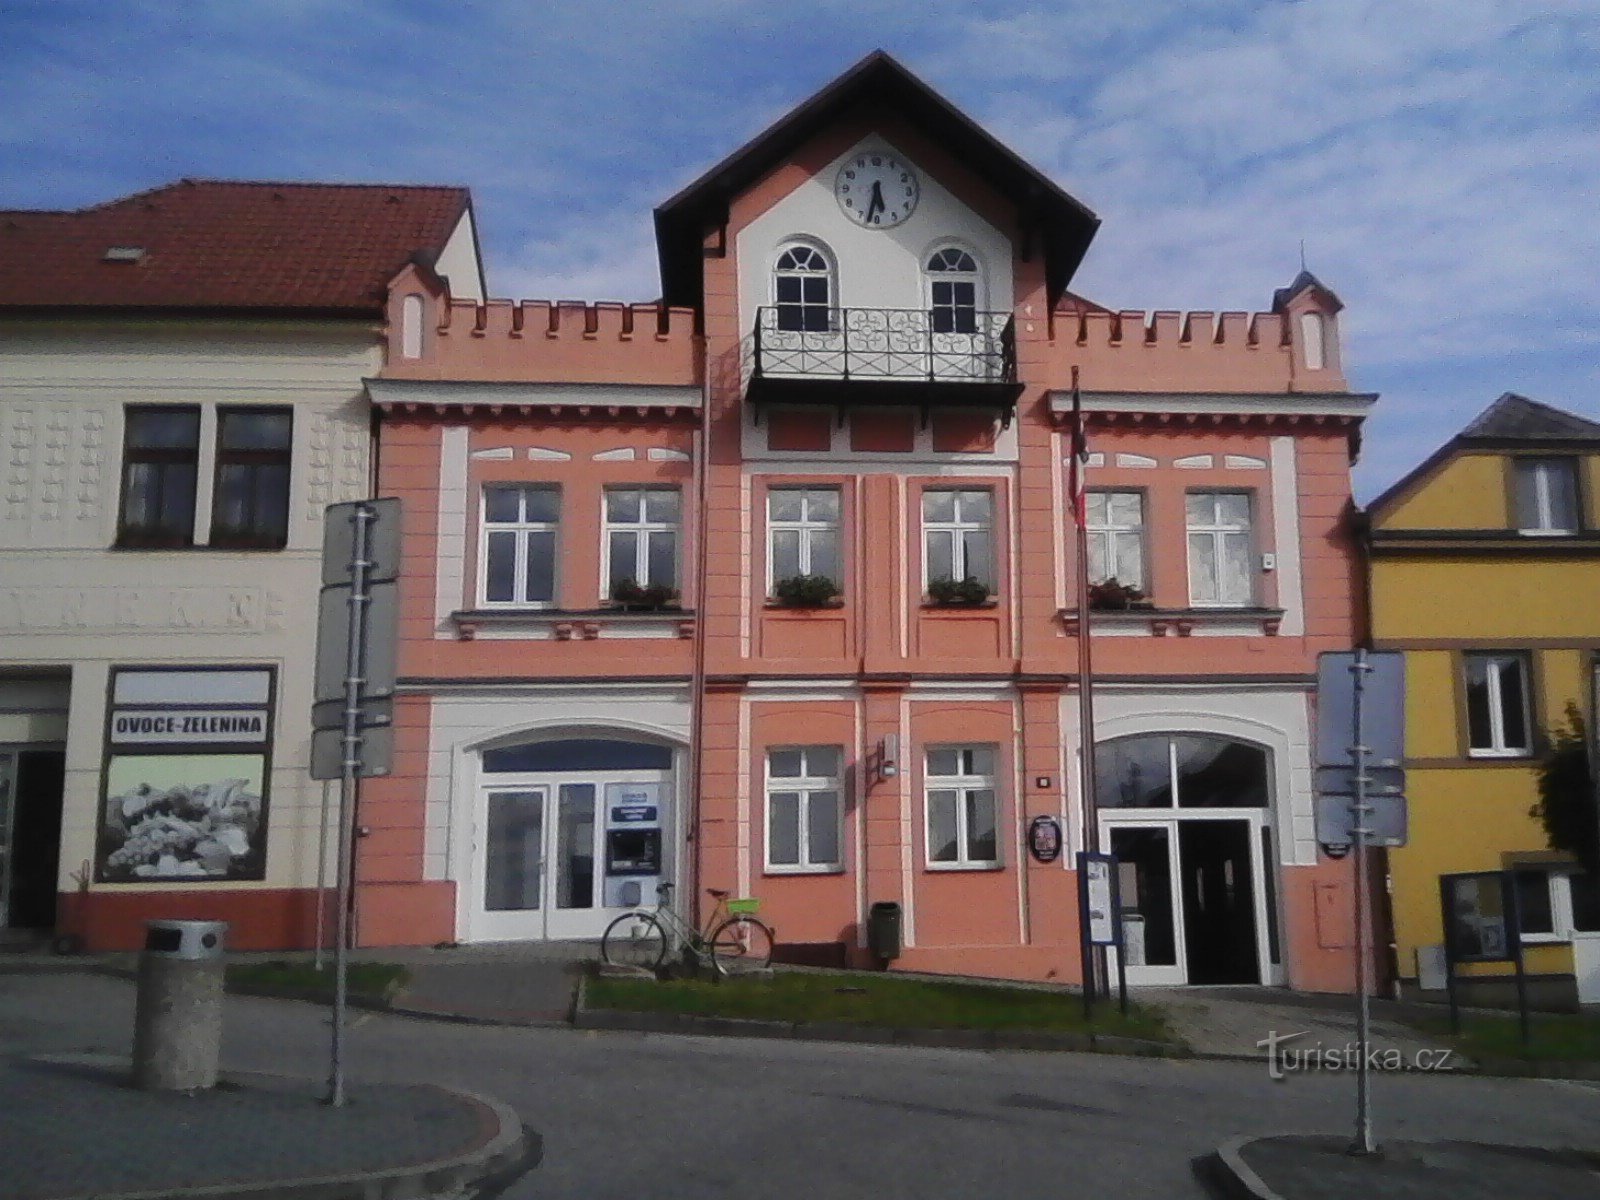 2. The town hall in Mladá Vožica used since 1872